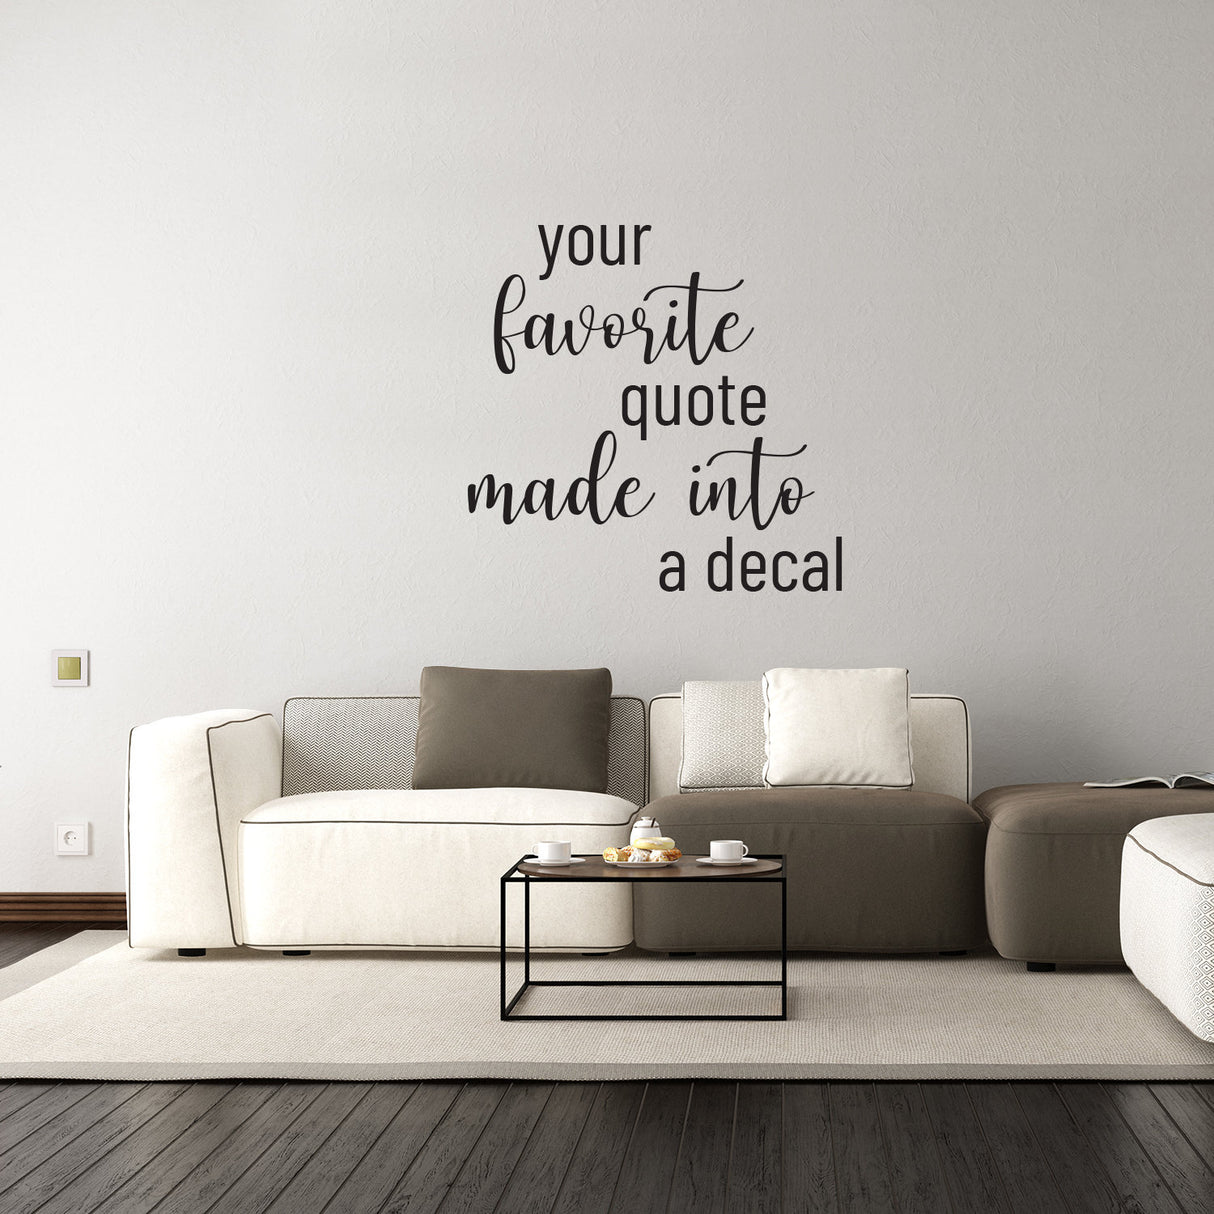 Customizable Vinyl Lettering - Design Your Own Personalized Quote Sticker